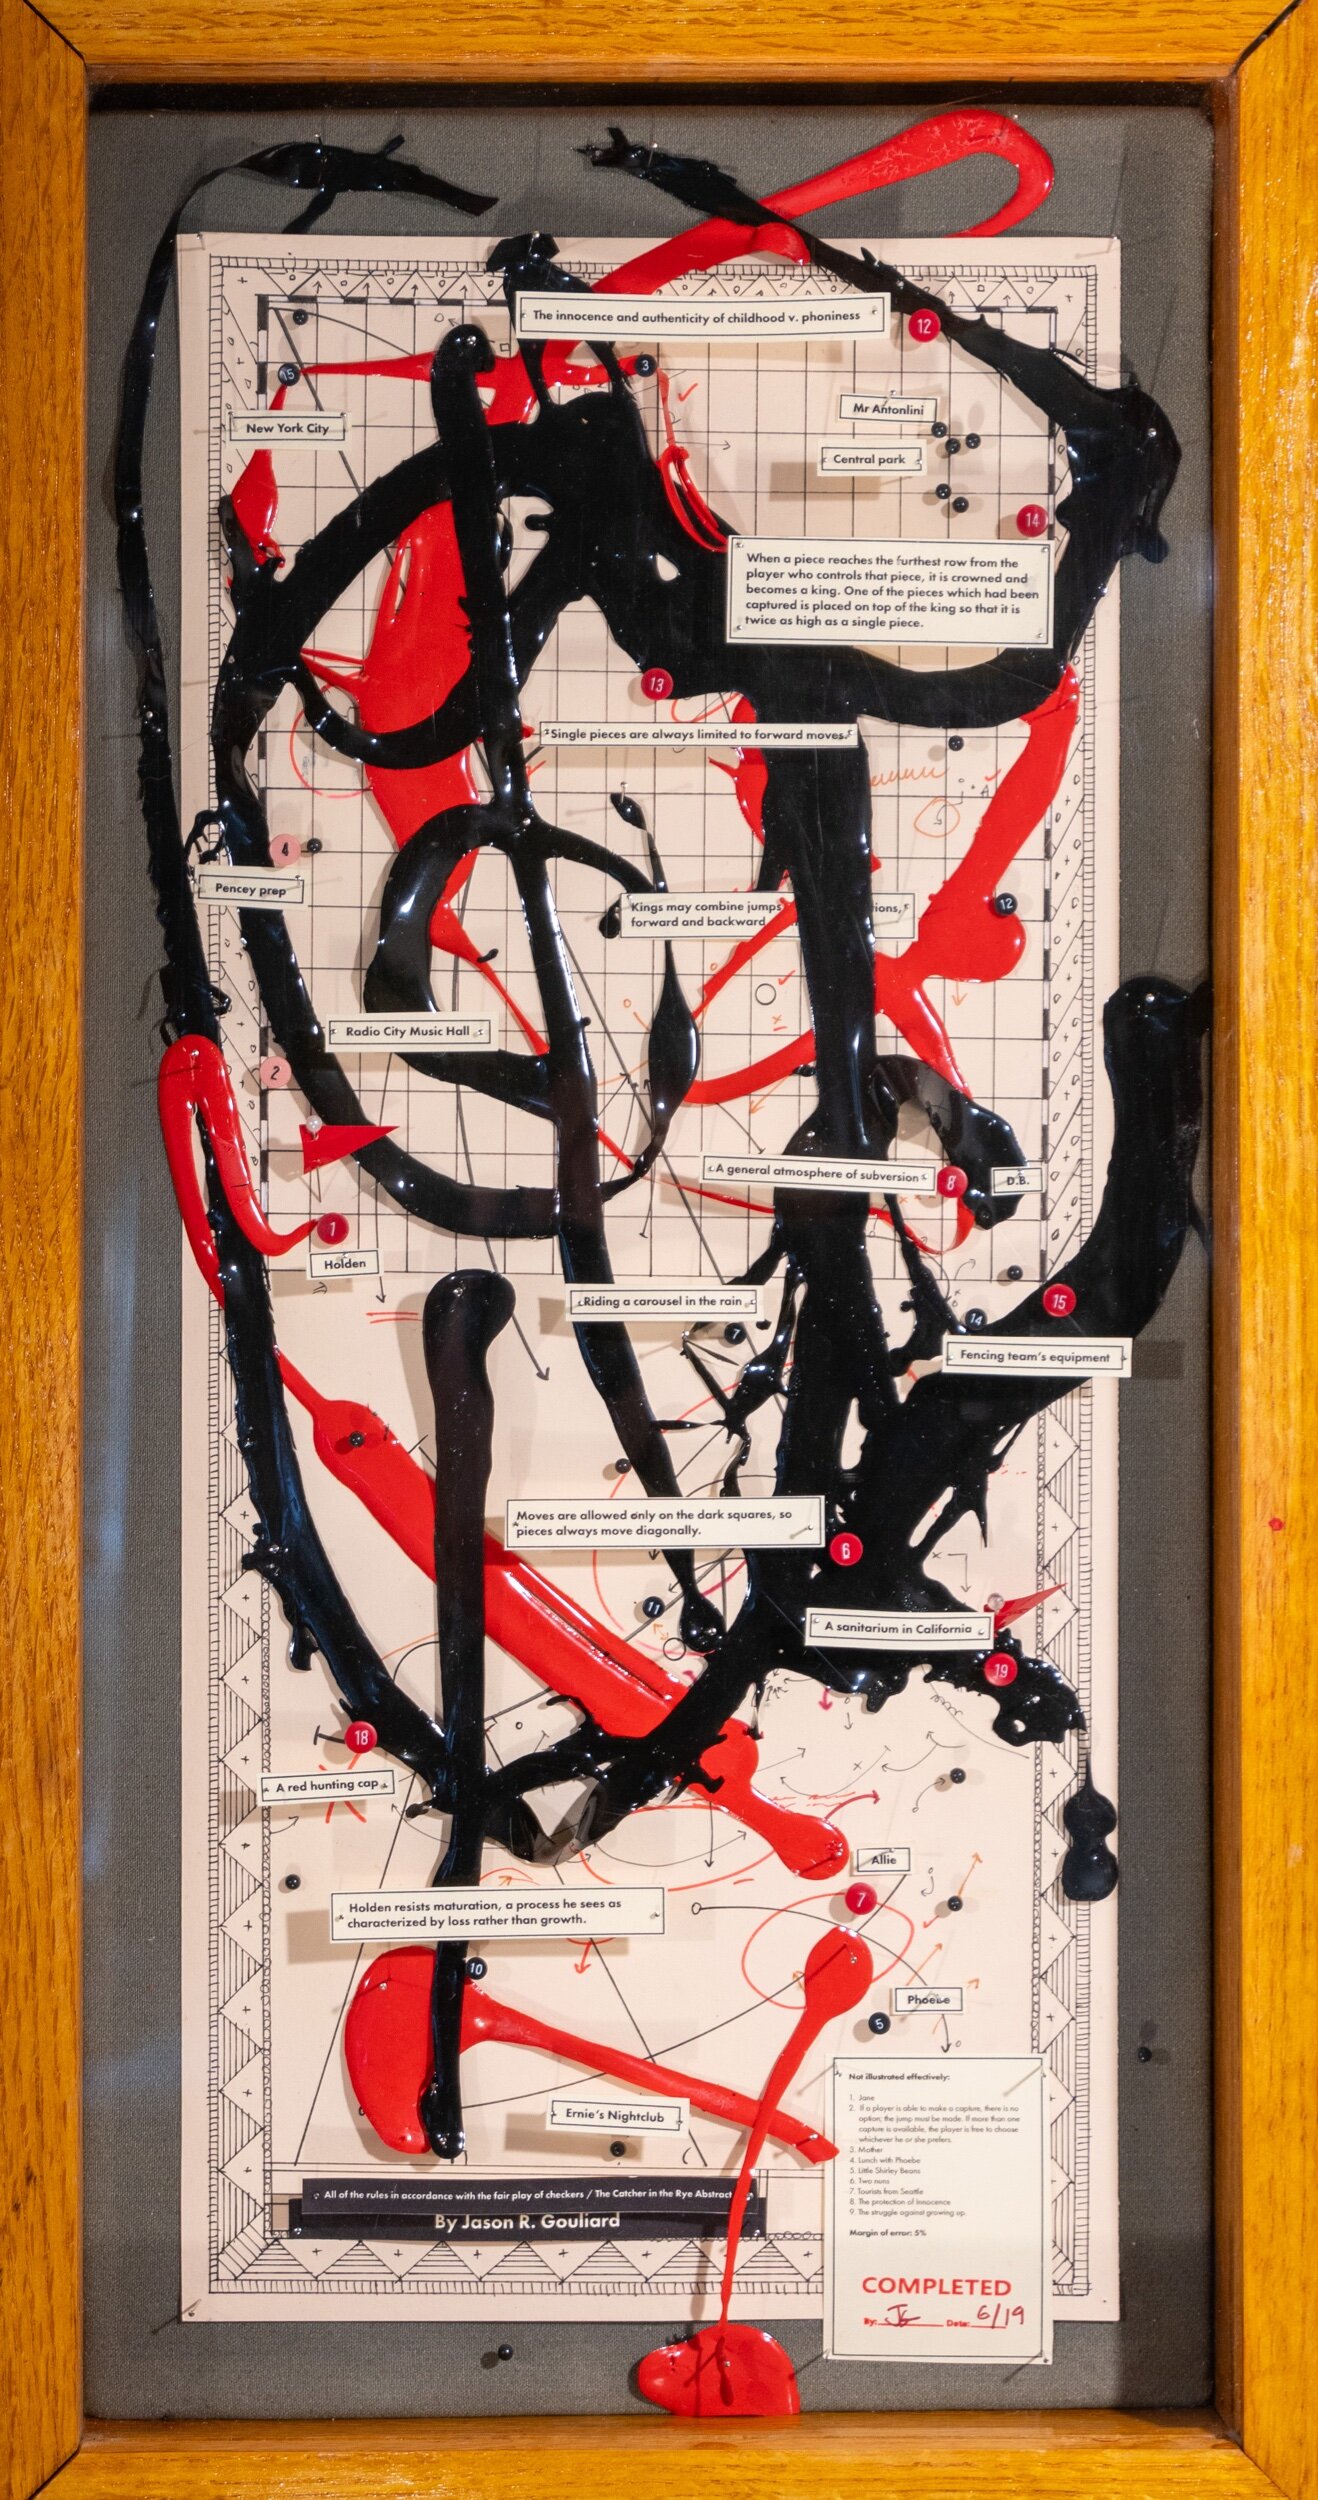 <b>Jason Gouliard</b></br><i>Traveller edition: All of rules in accordance with the fair play of checkers/"Catcher in the Rye" Abstract</i></br>2021</br>mixed media assemblage  